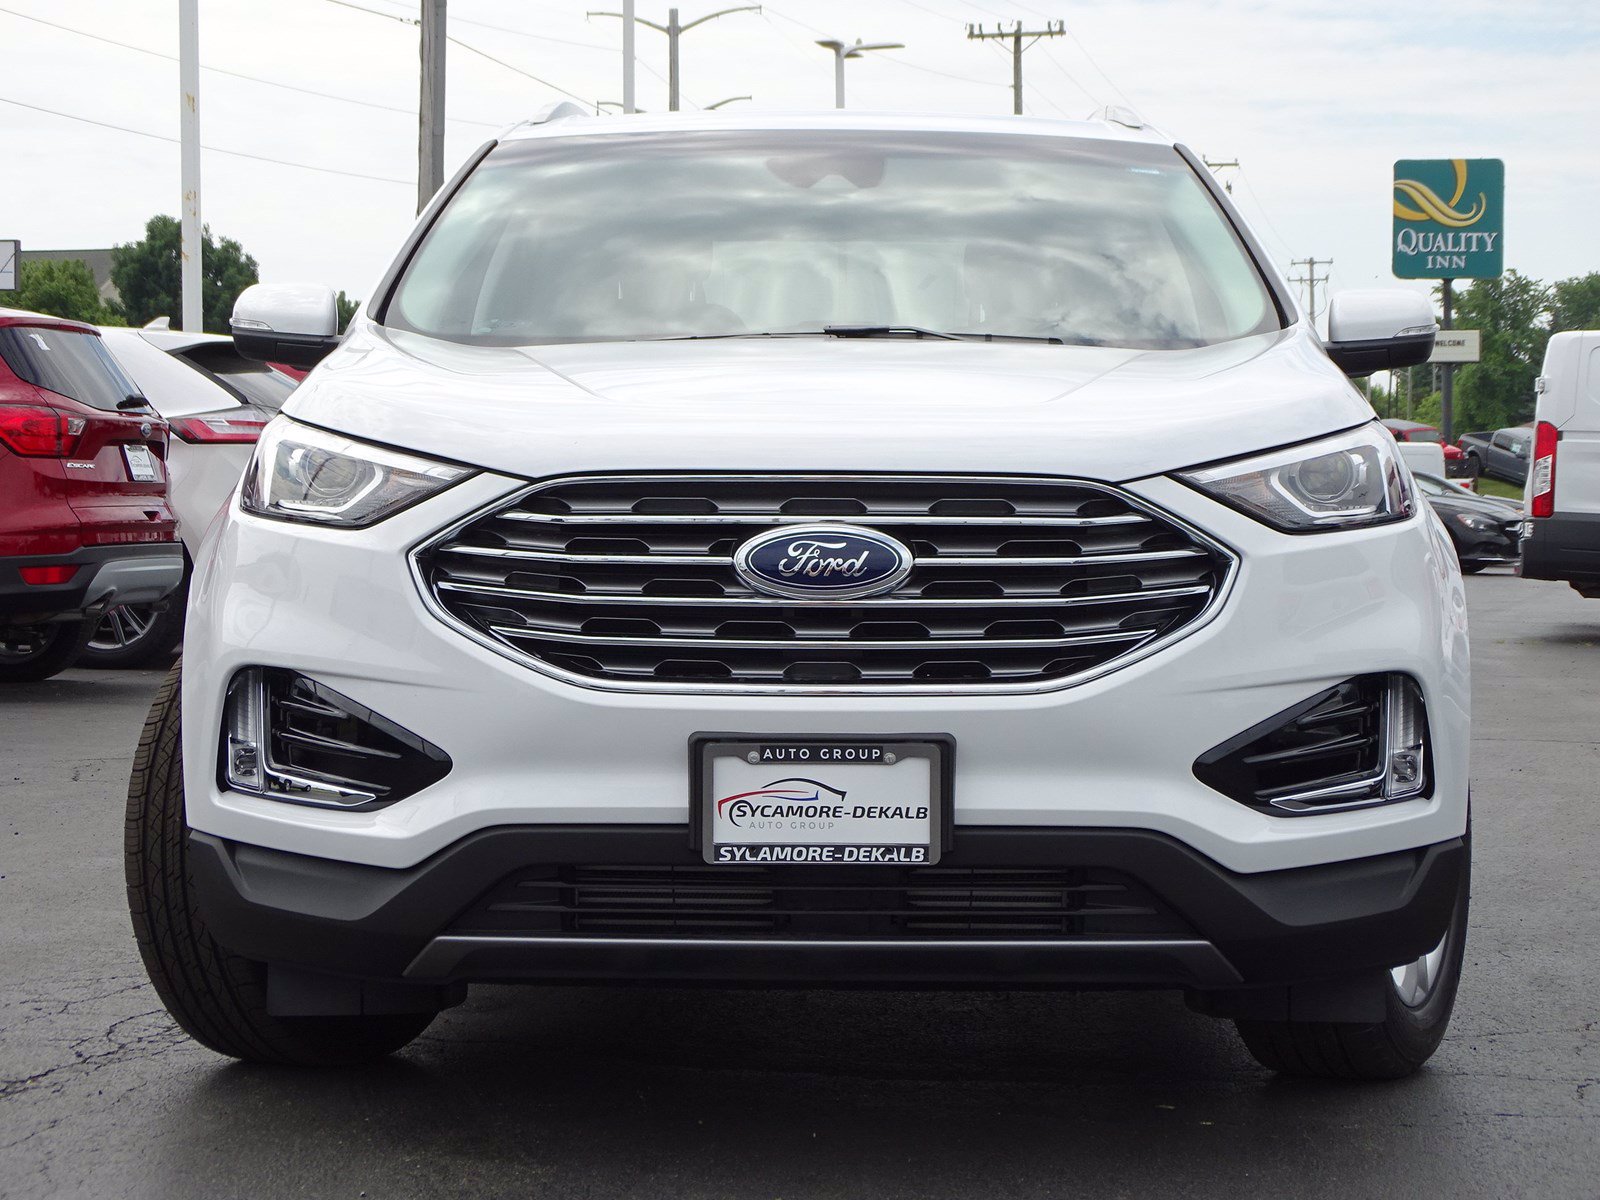 New 2019 Ford Edge SEL Sport Utility in Sycamore #F19-127 ...